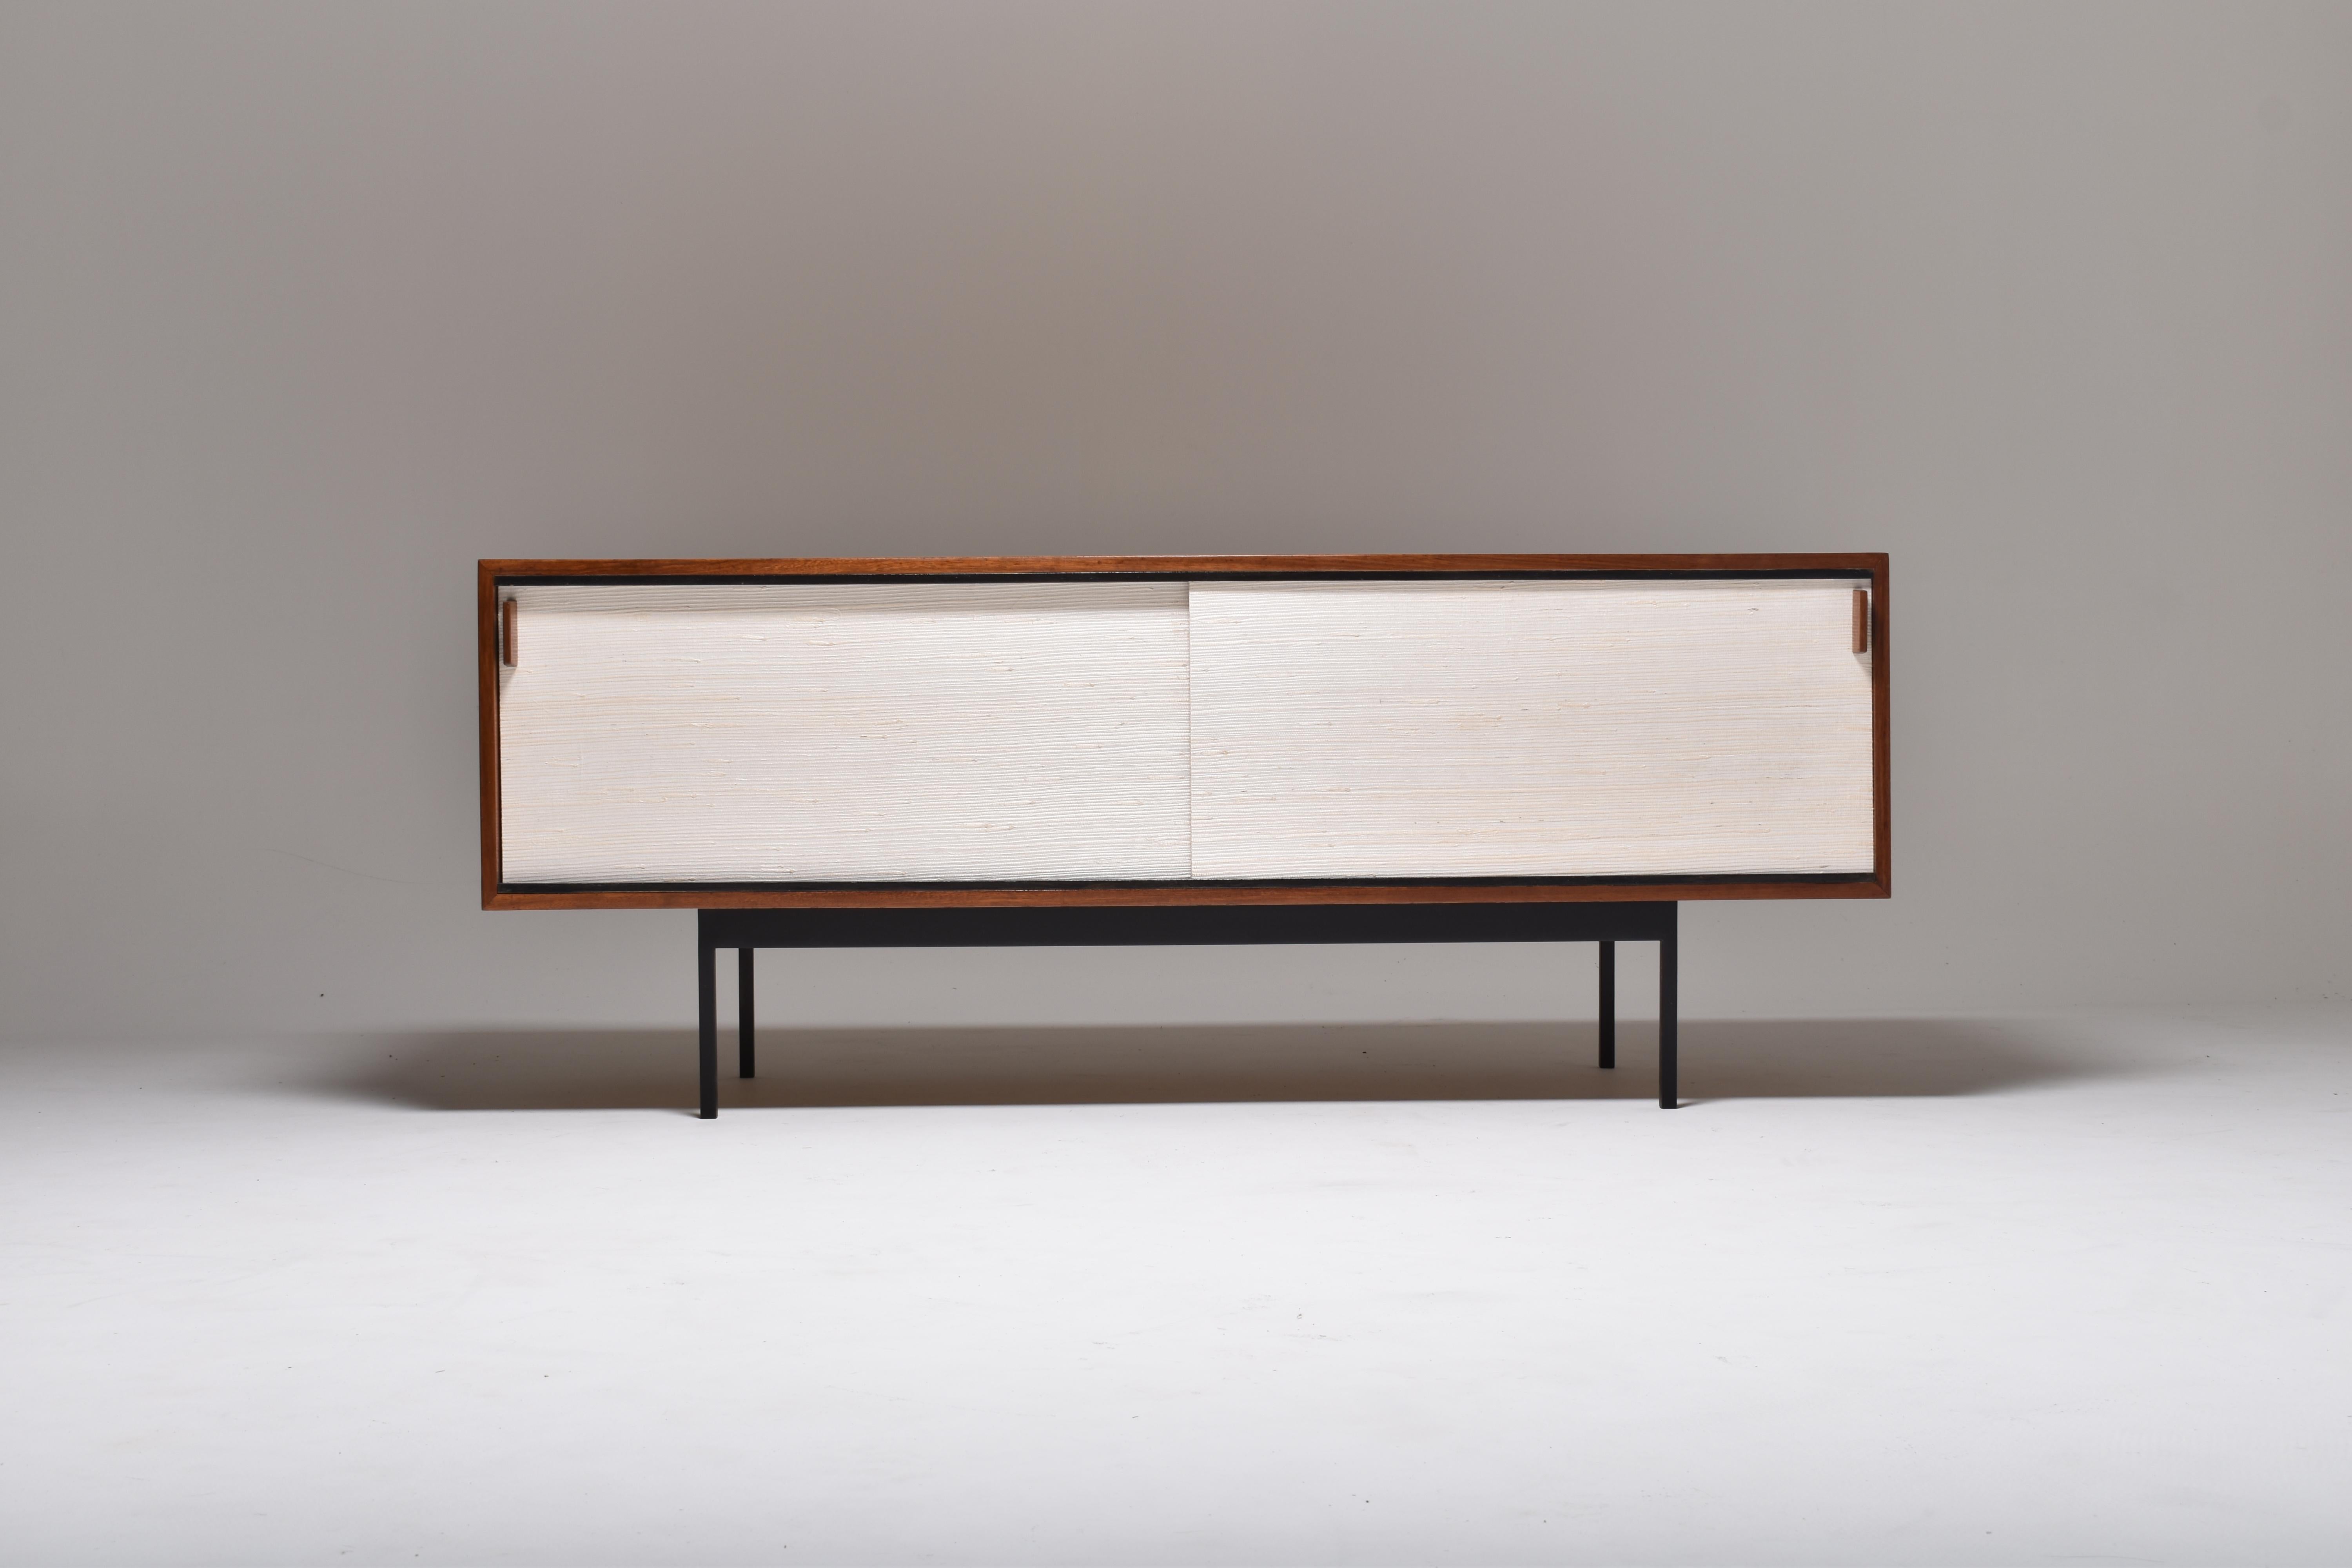 Teak sliding doors sideboard by Dieter Waeckerlin.

The sideboard is part of a furniture series designed at the end of the 1950s by Swiss designer and interior designer Dieter Waeckerlin and produced by his own furniture manufacturer Idealheim, in